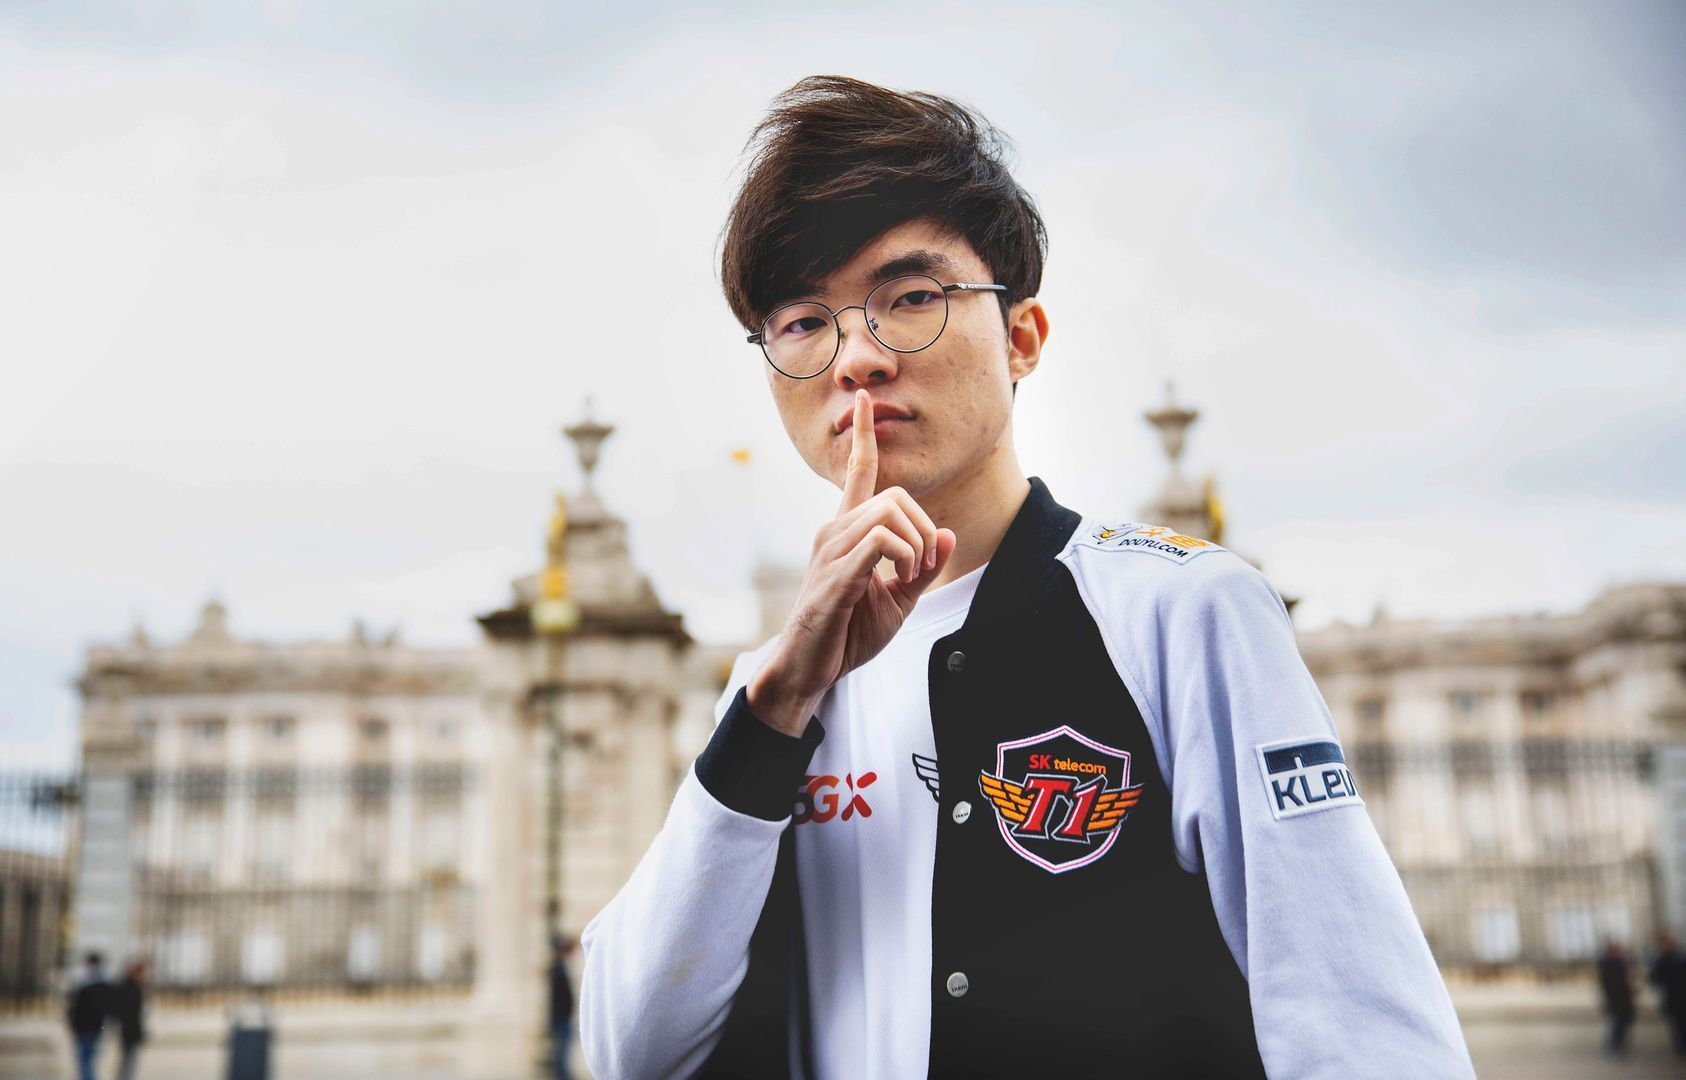 LCK on X: Faker has locked in Veigar, his 72nd unique champion pick in the  #LCK!  / X